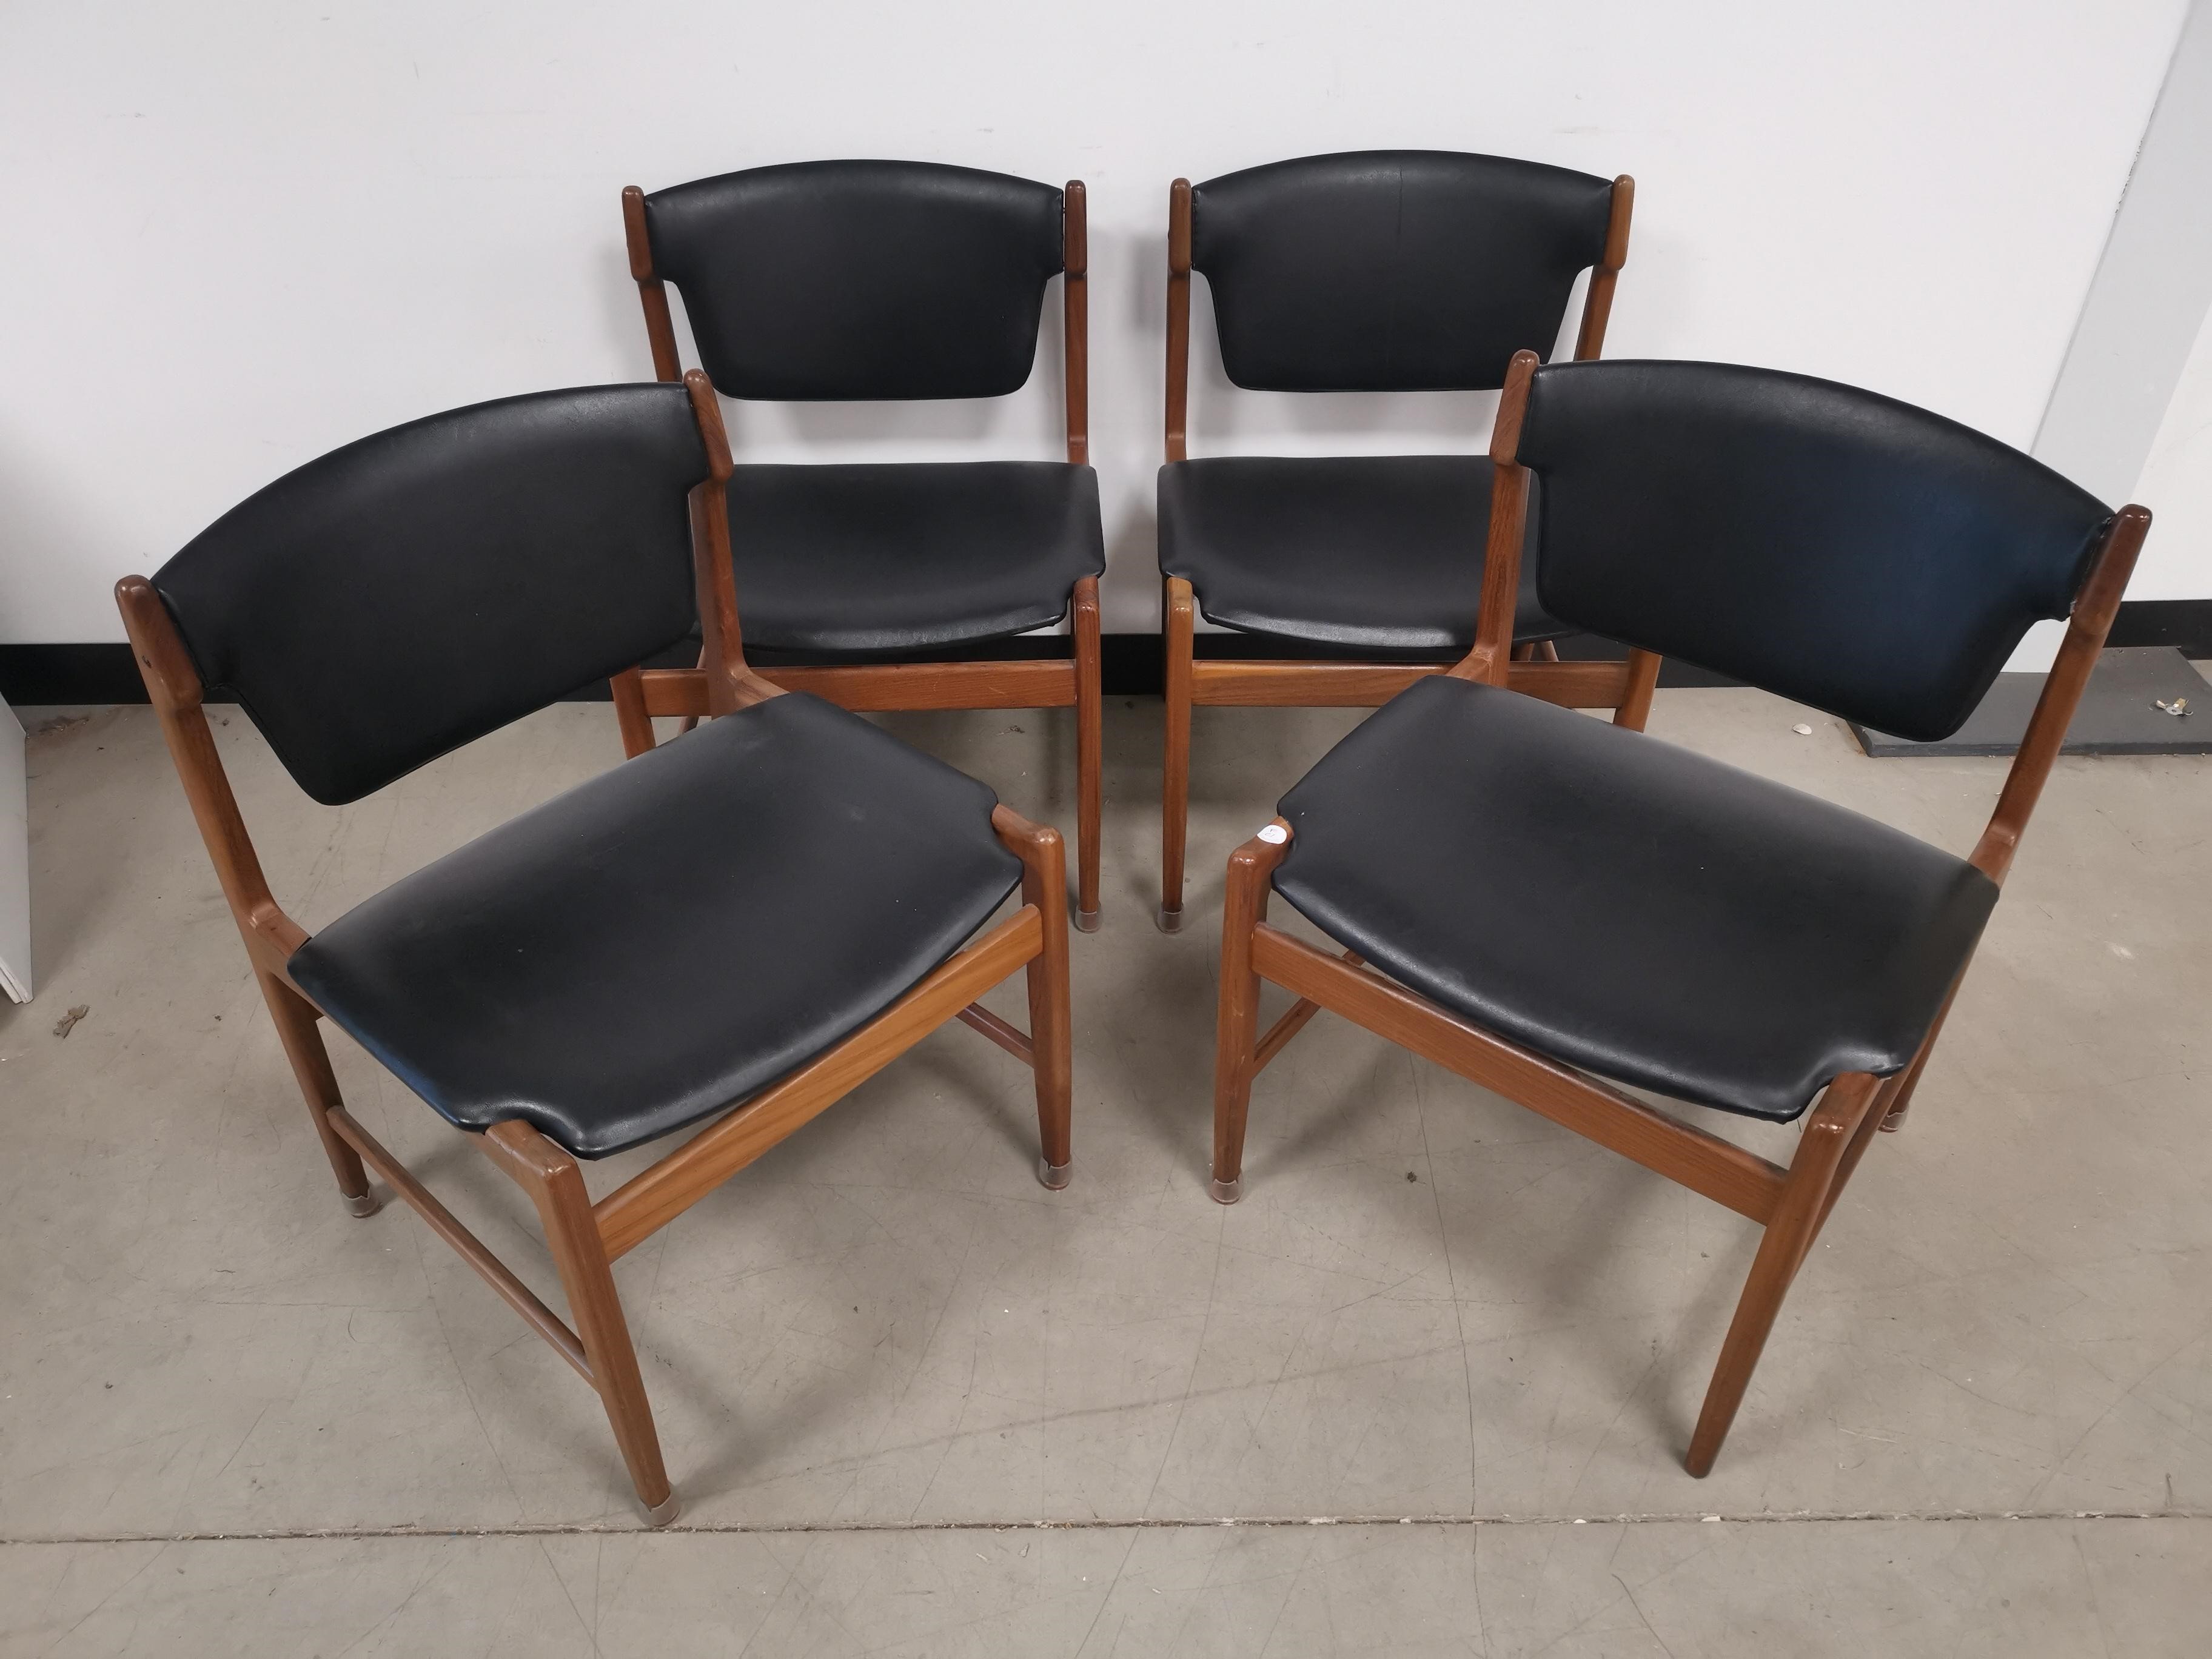 Set of four mid 20th Century G-Plan teak dining chairs, finished in black vinyl.